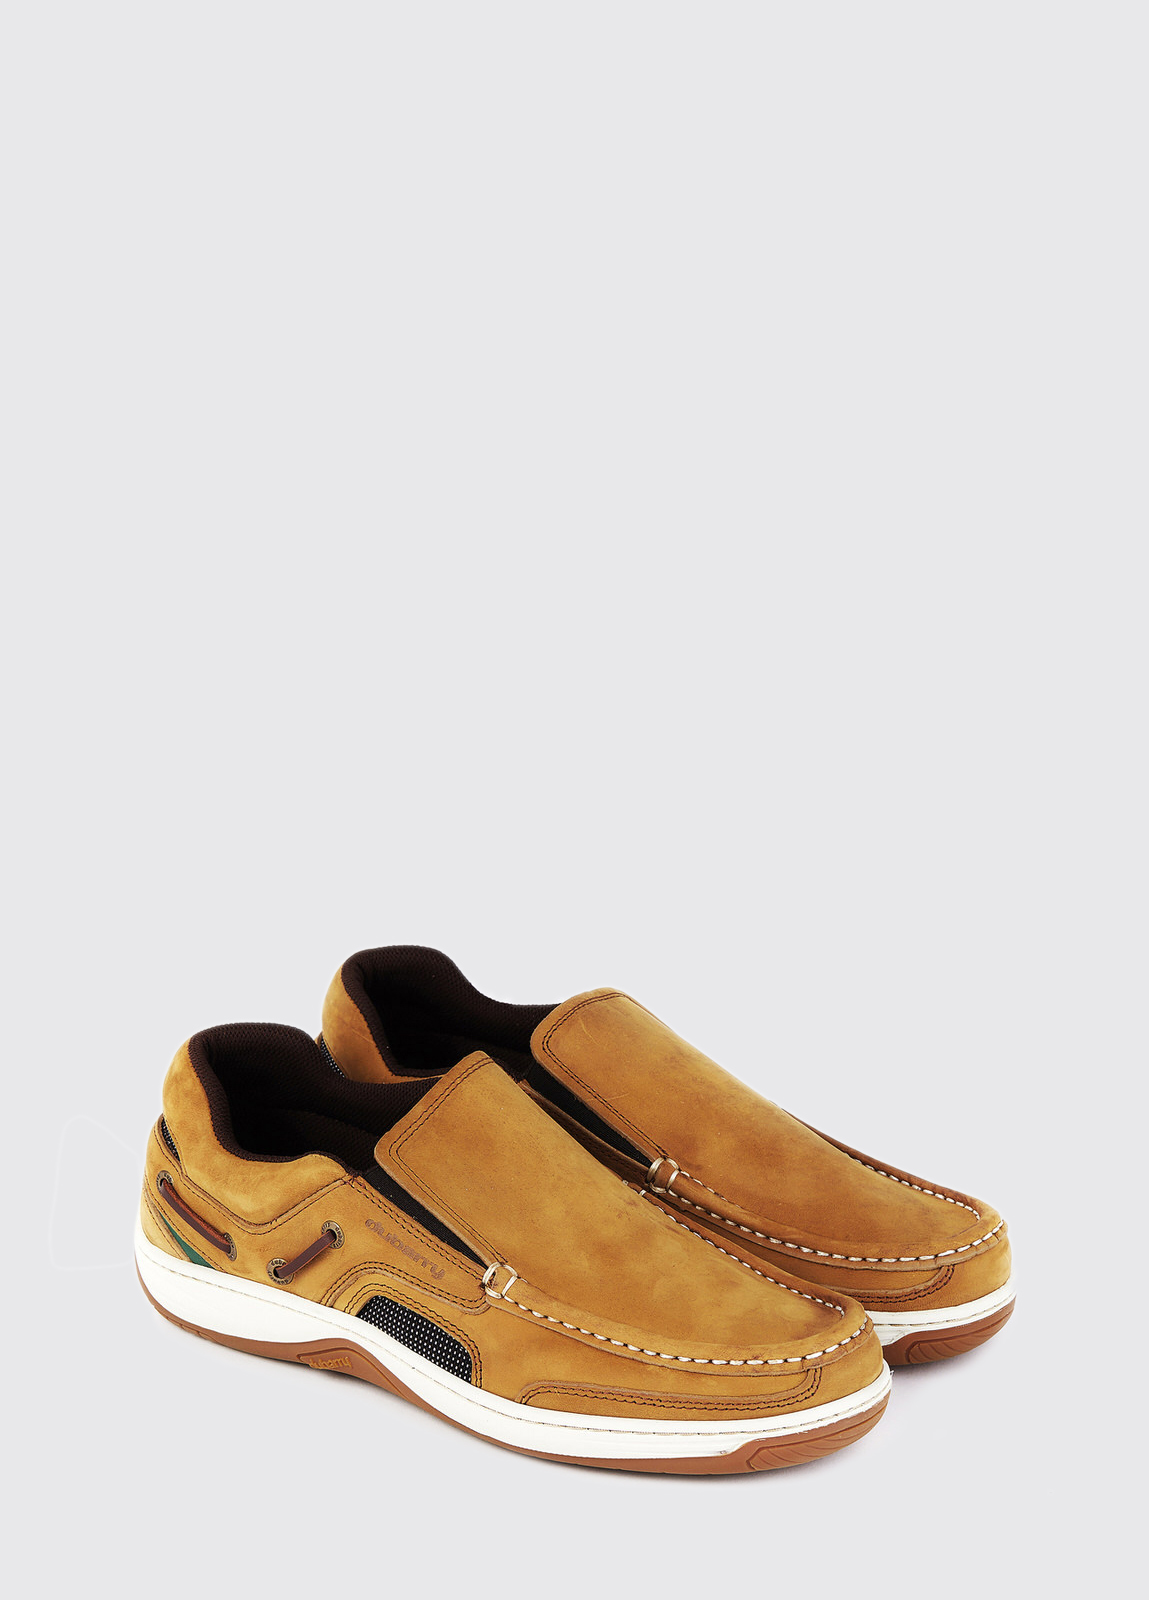 a casual shoe for yachting